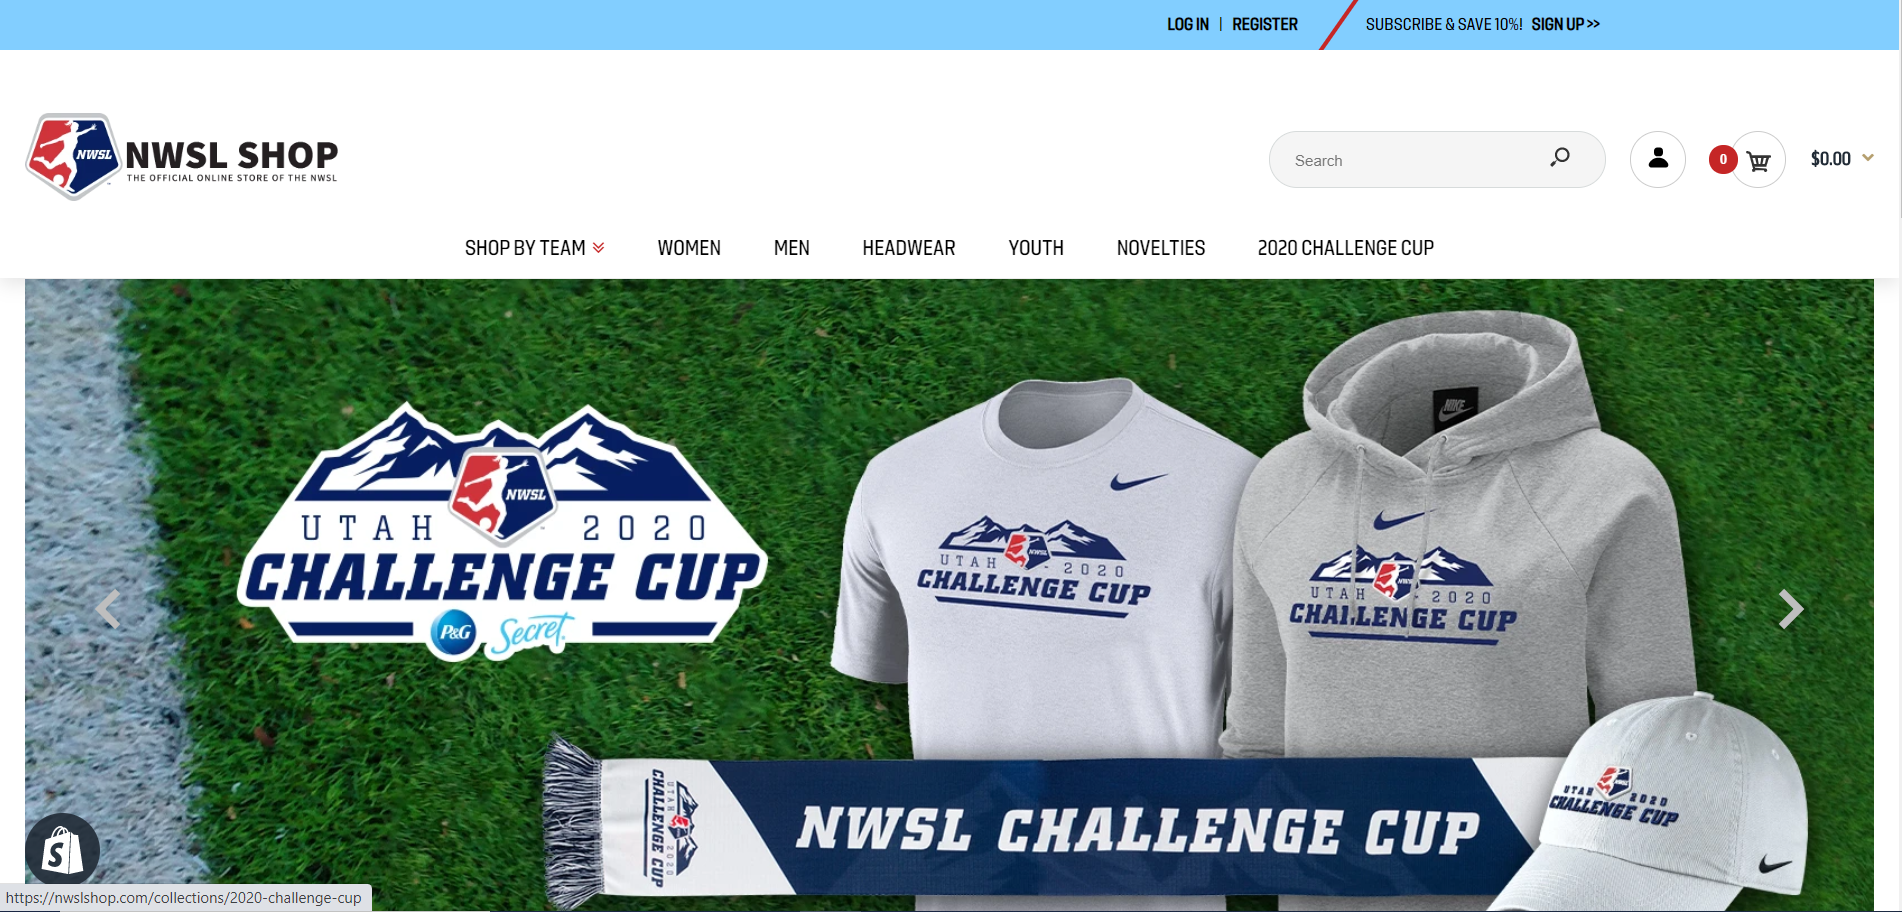 The Official Online Store of the NWSL